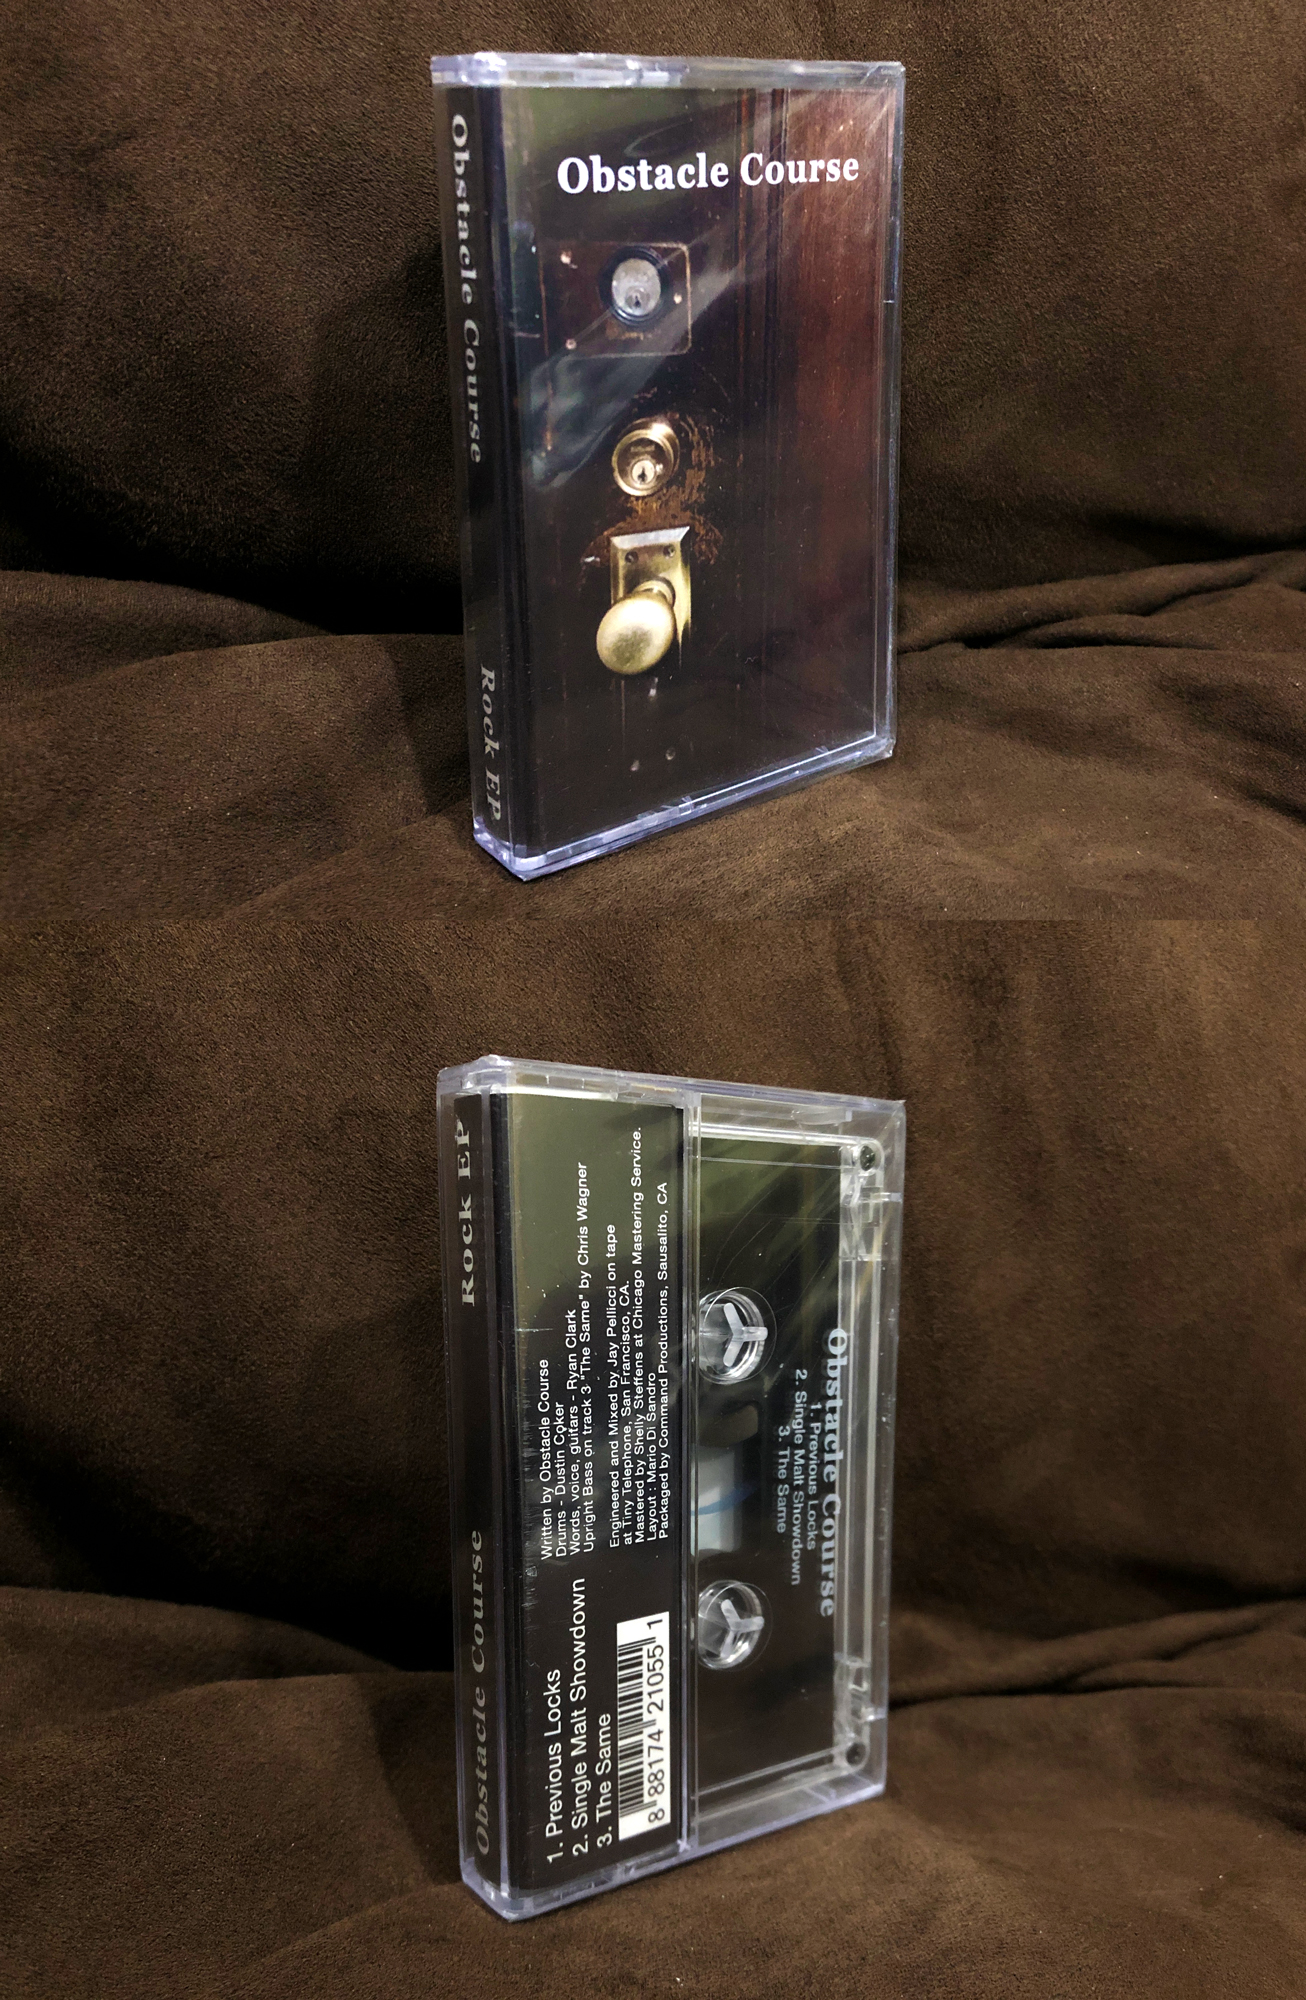 Client: Obstacle Course, singer-songwriter, musician from the Bay Area. Description: Designed the J-Single Cassette insert packaging for Obstacle Course's limited cassette pressing.